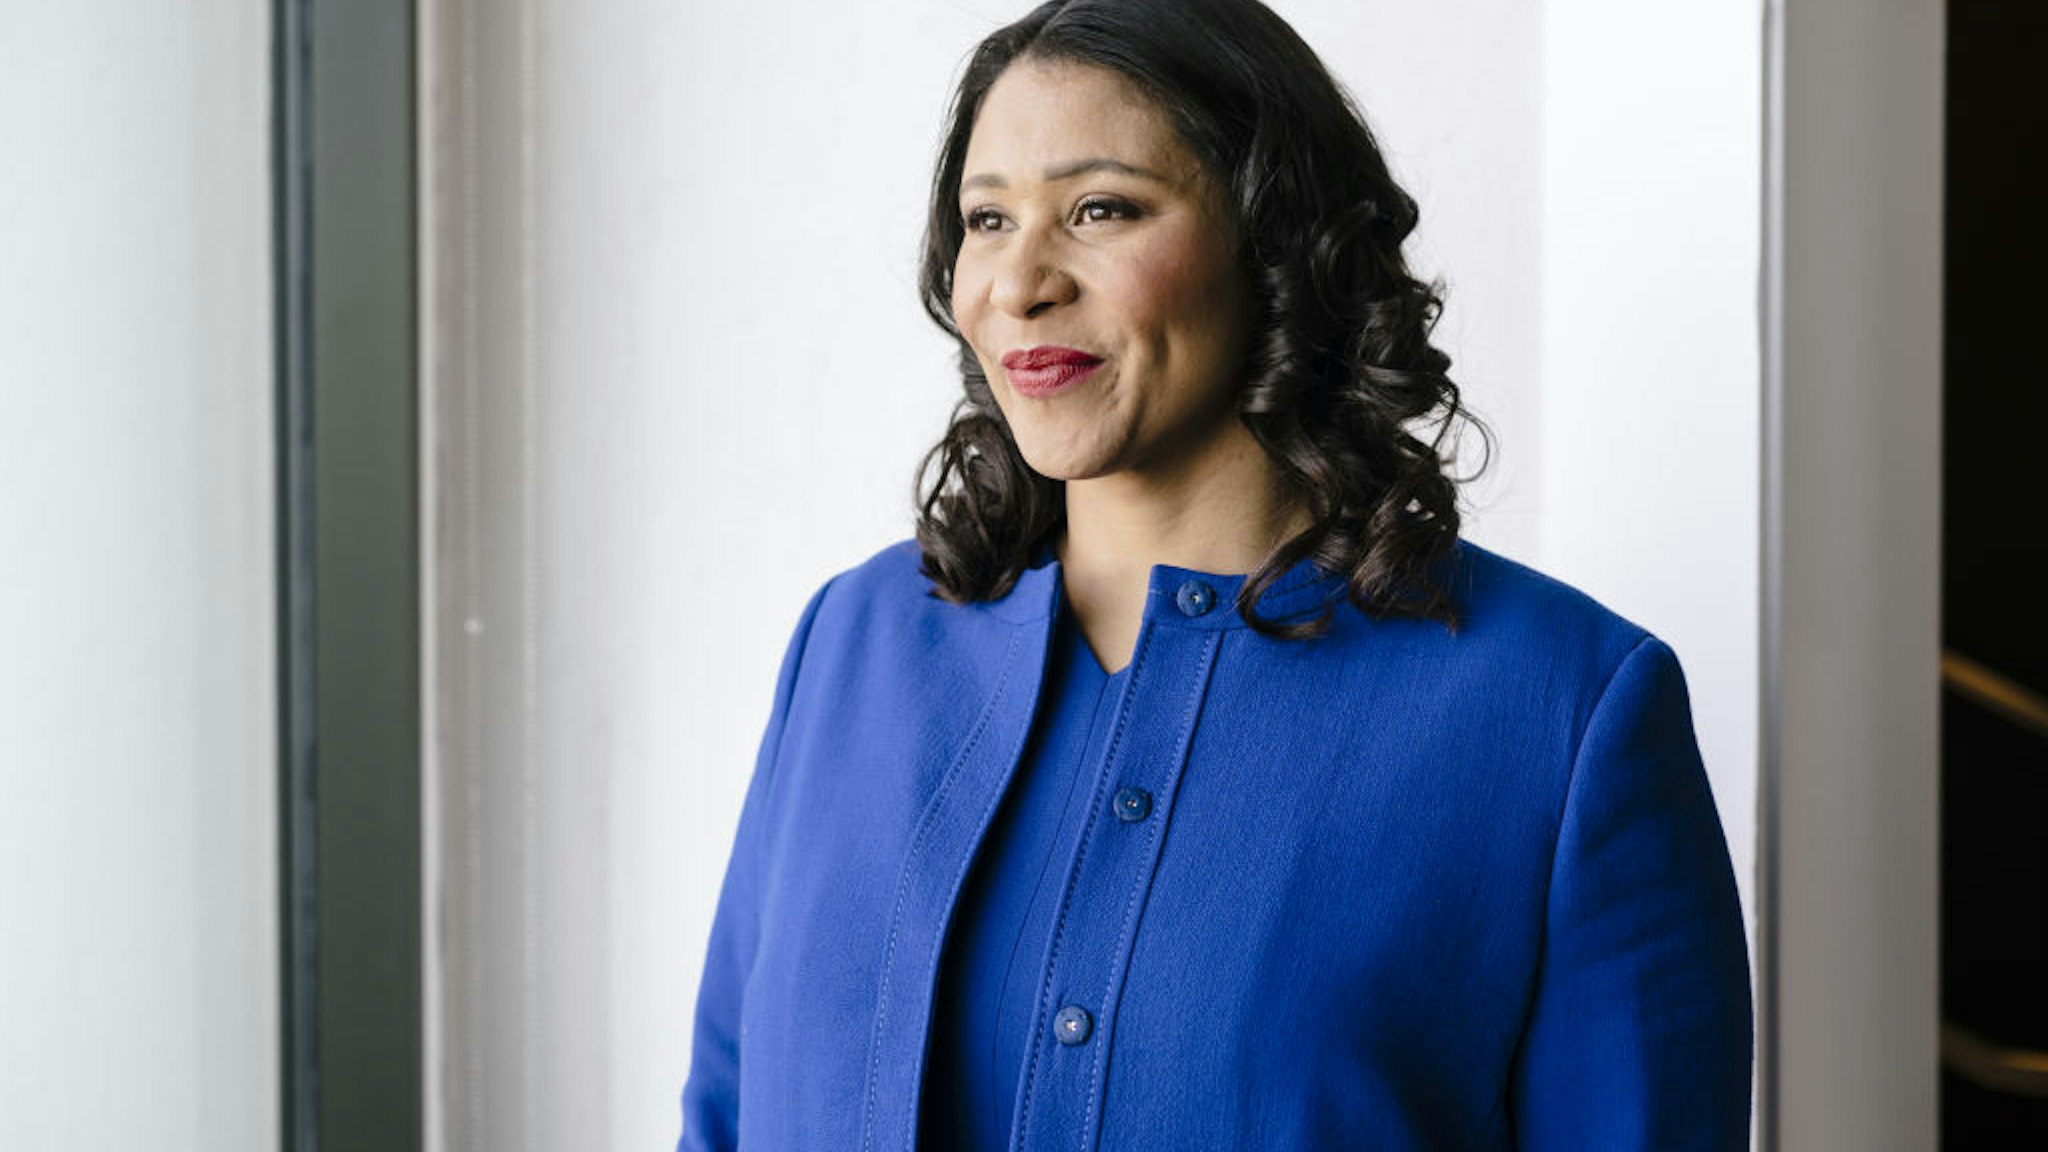 London Breed, mayor of San Francisco, stands for a photograph following a Bloomberg radio interview in San Francisco, California, U.S., on Tuesday, Feb. 5, 2020.